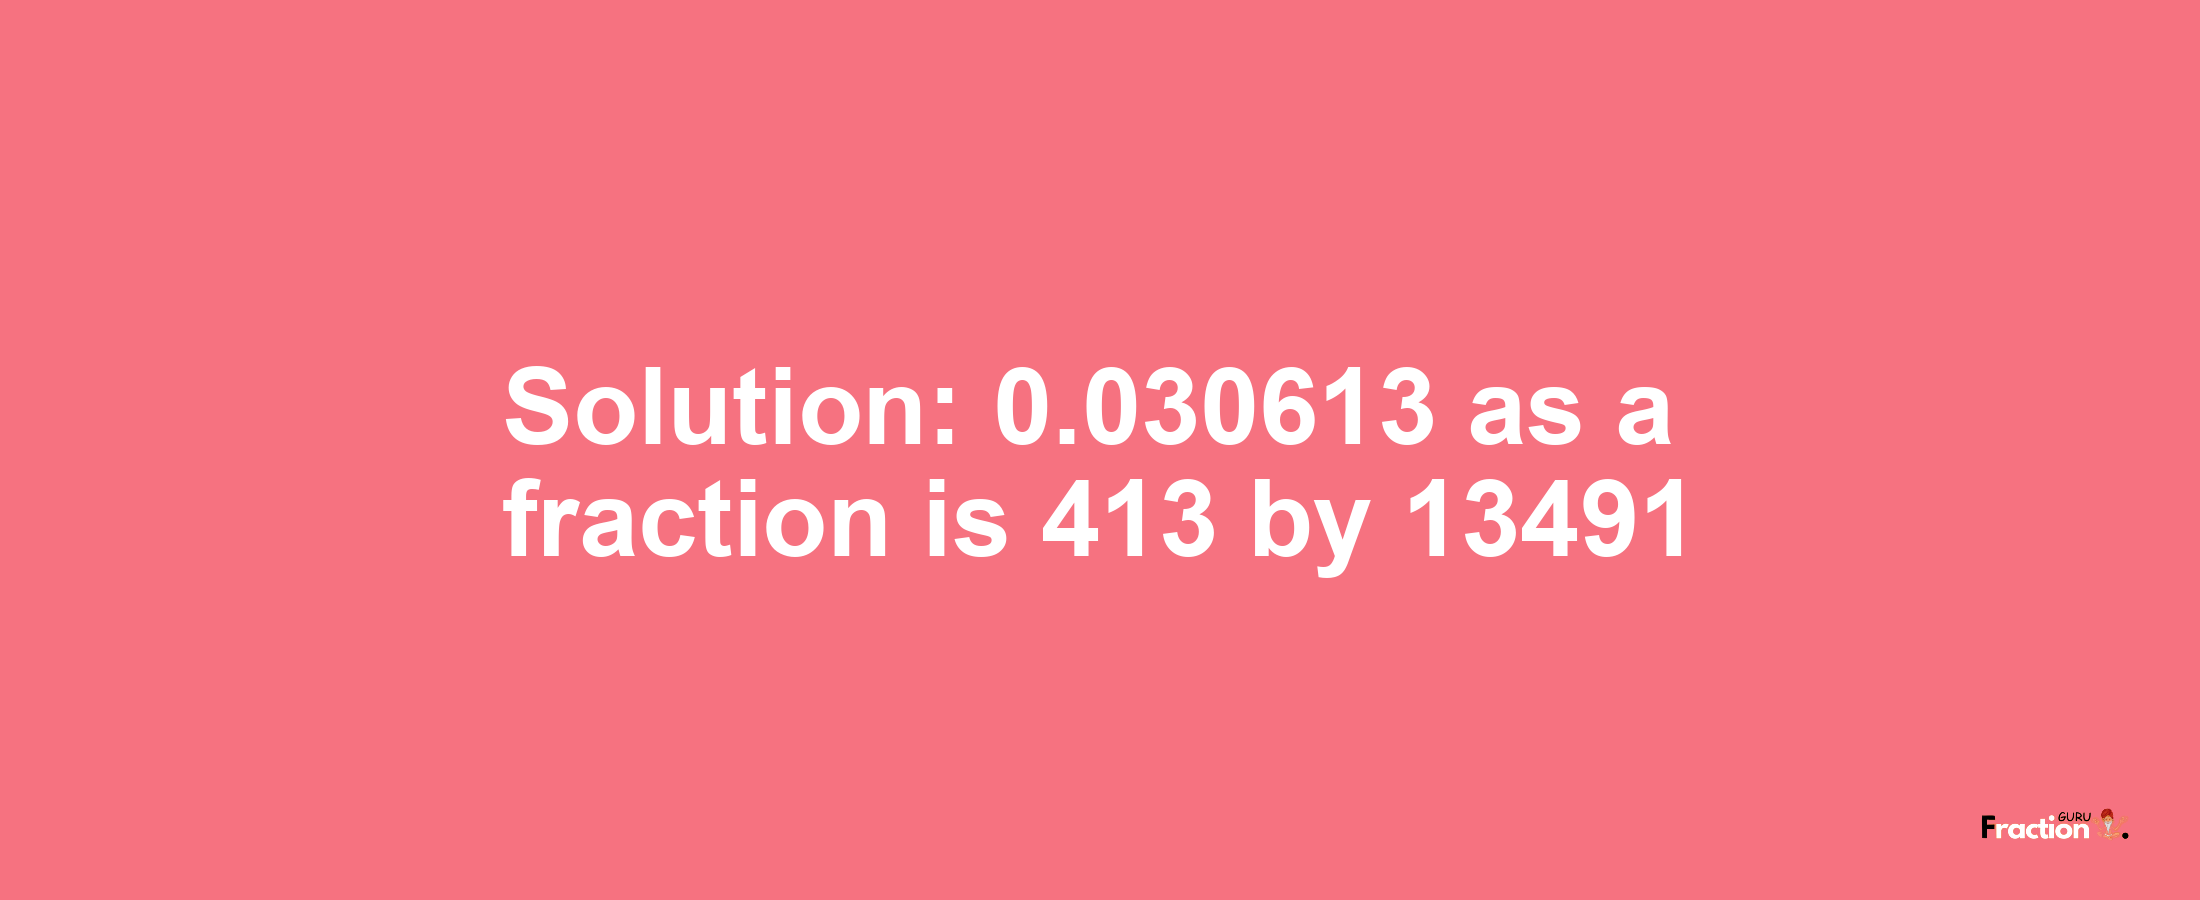 Solution:0.030613 as a fraction is 413/13491